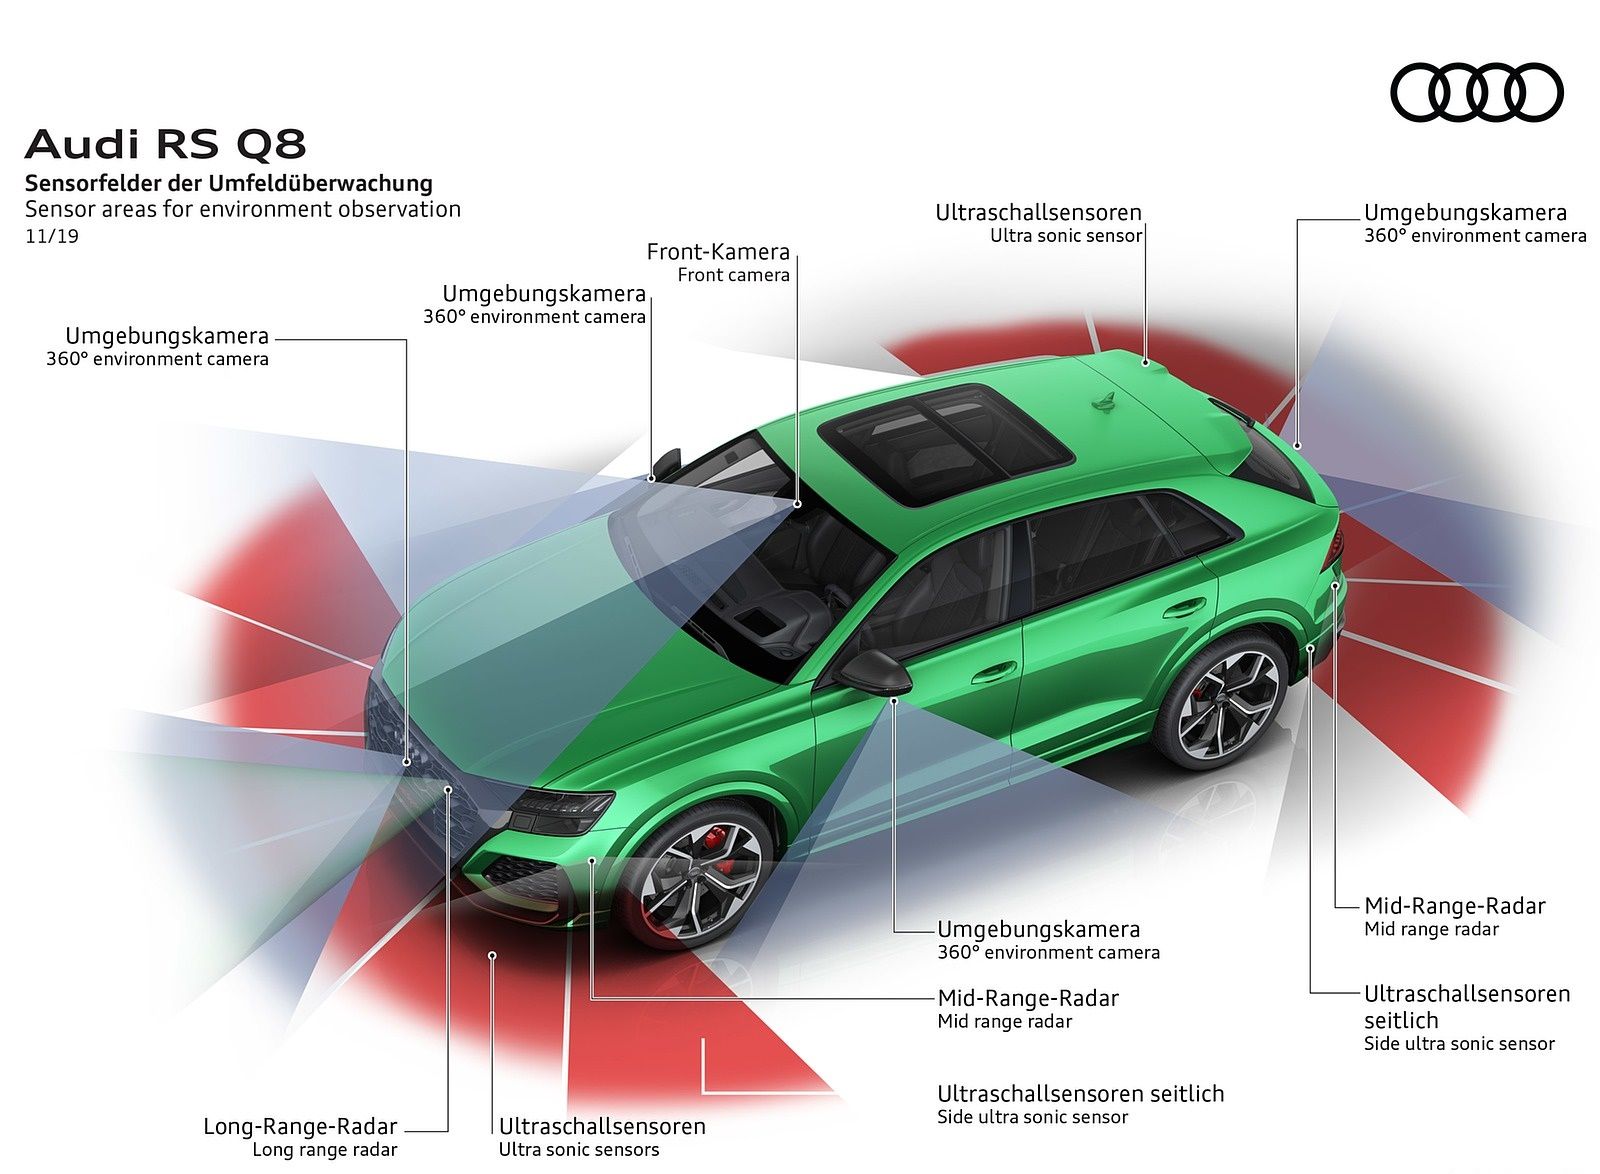 Audi RS Q8 Sensor areas for environment oberservation Wallpaper (159)